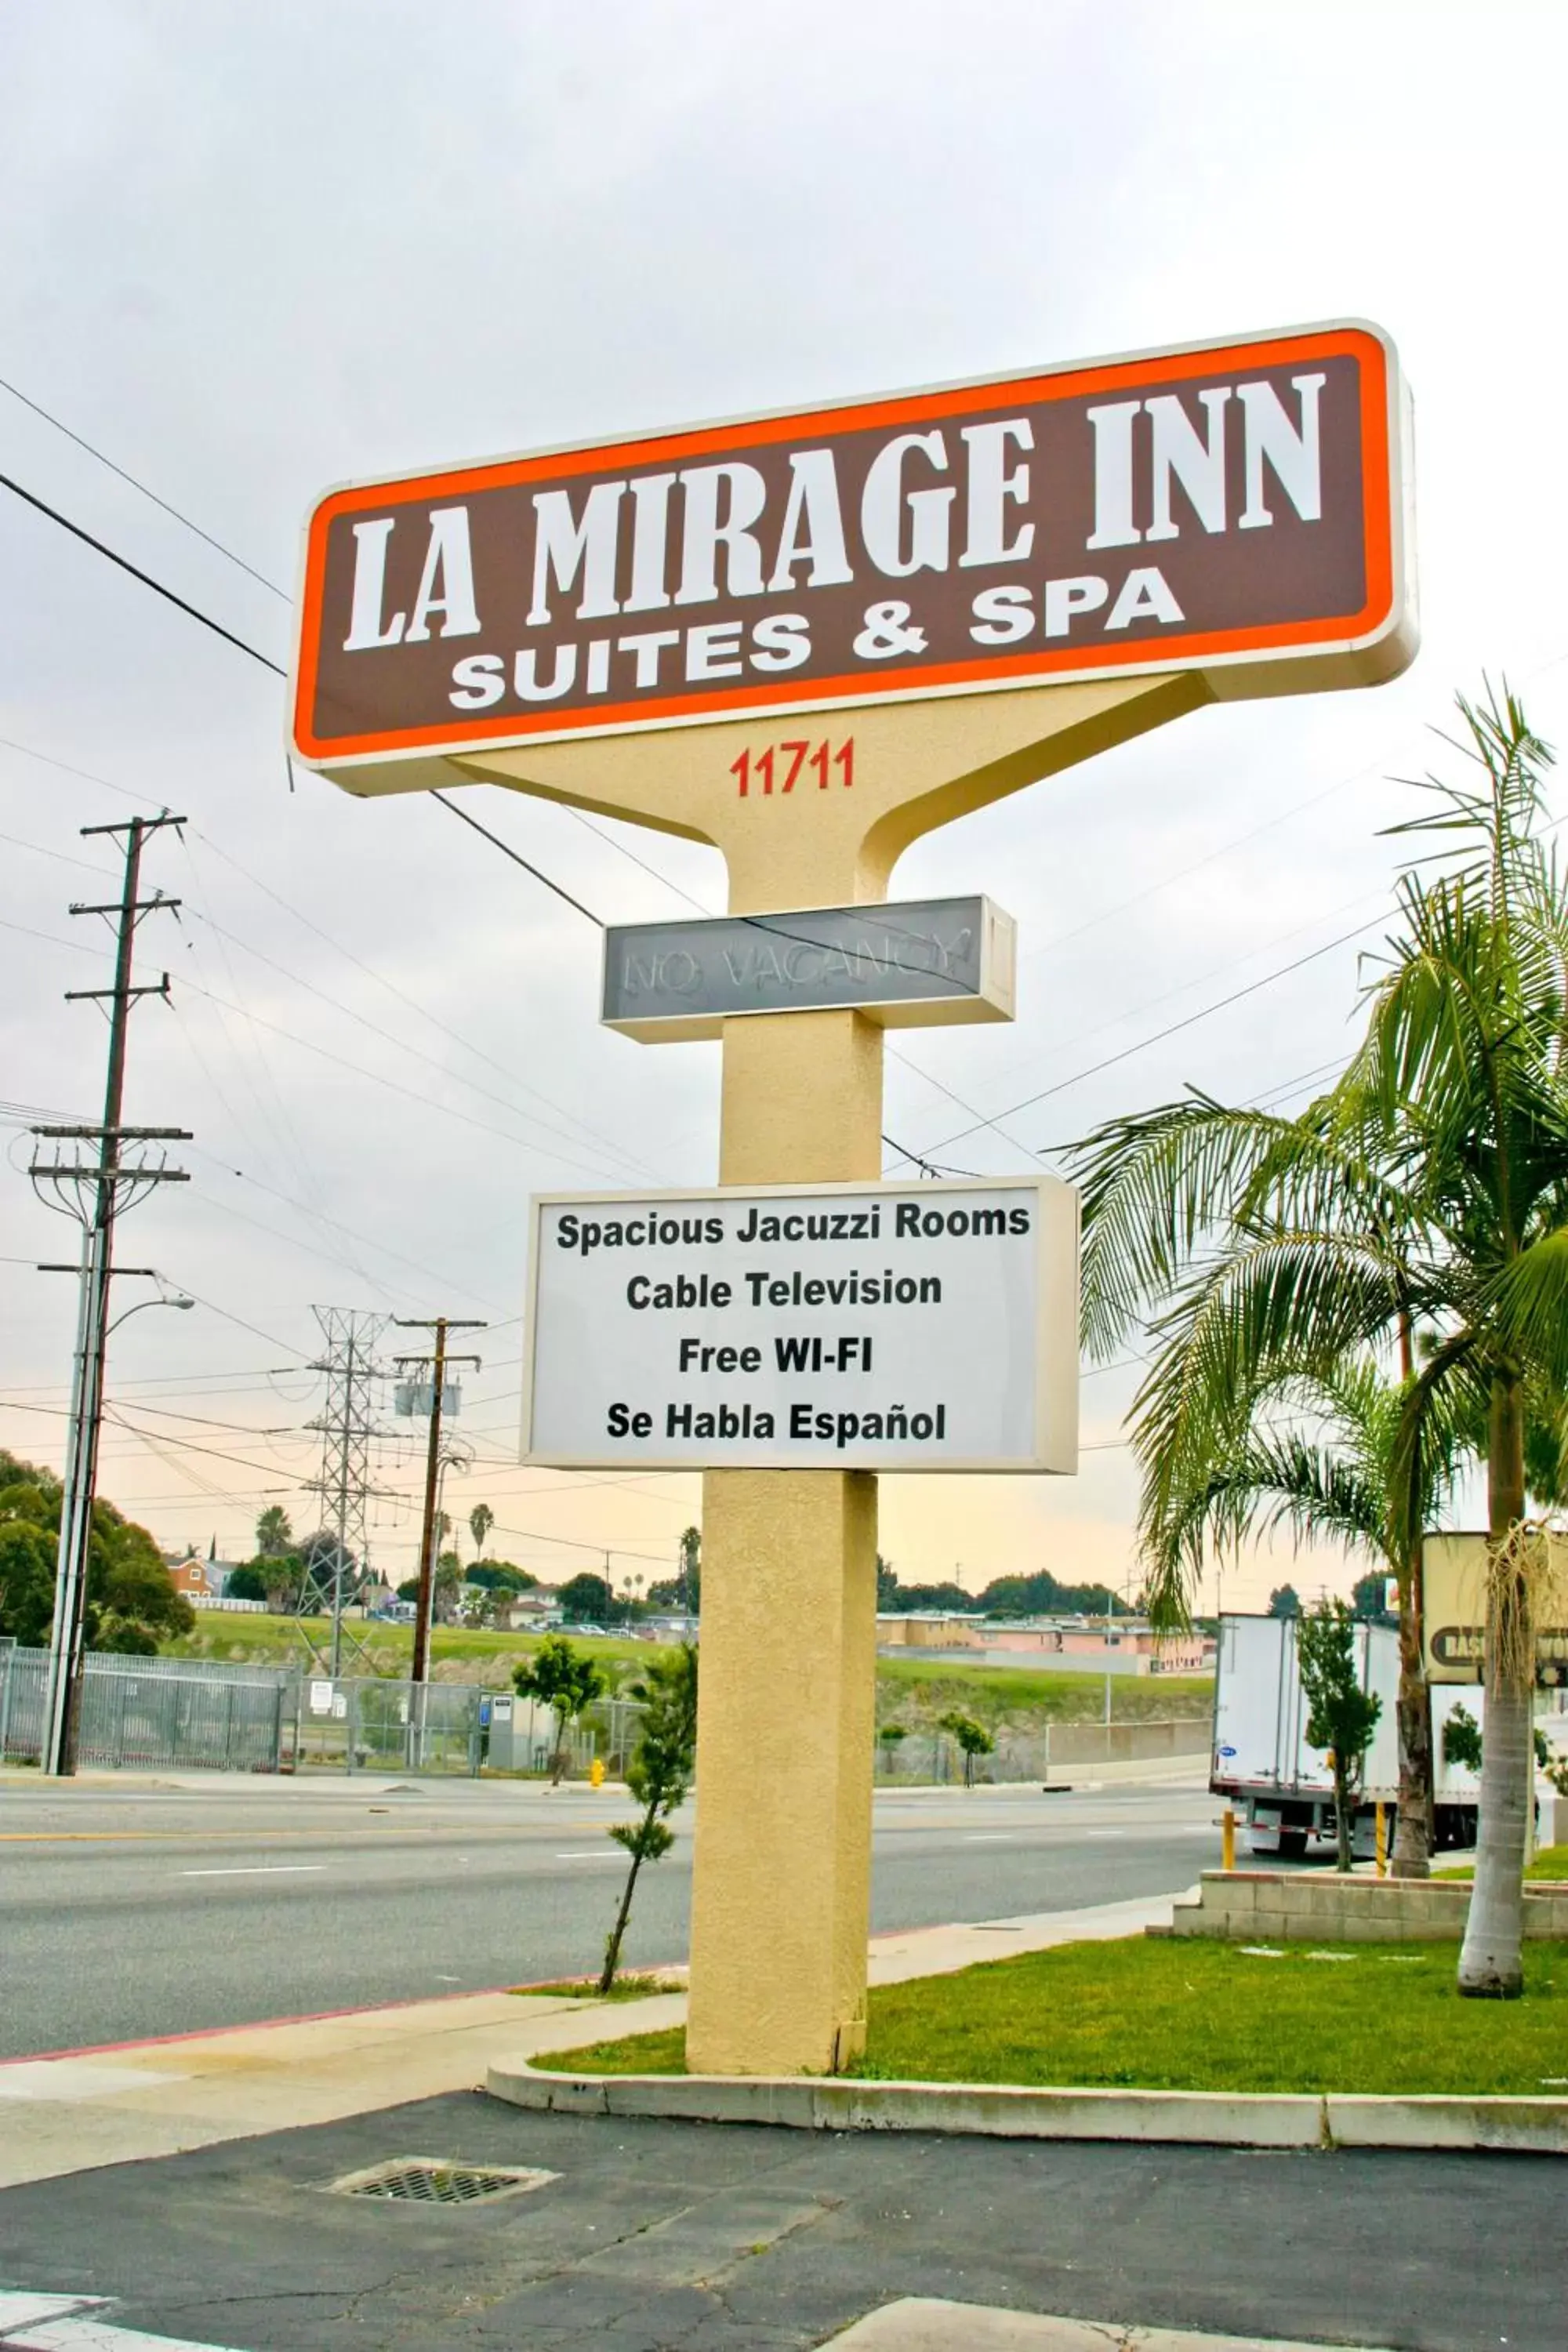 Property logo or sign in La Mirage Inn LAX Airport